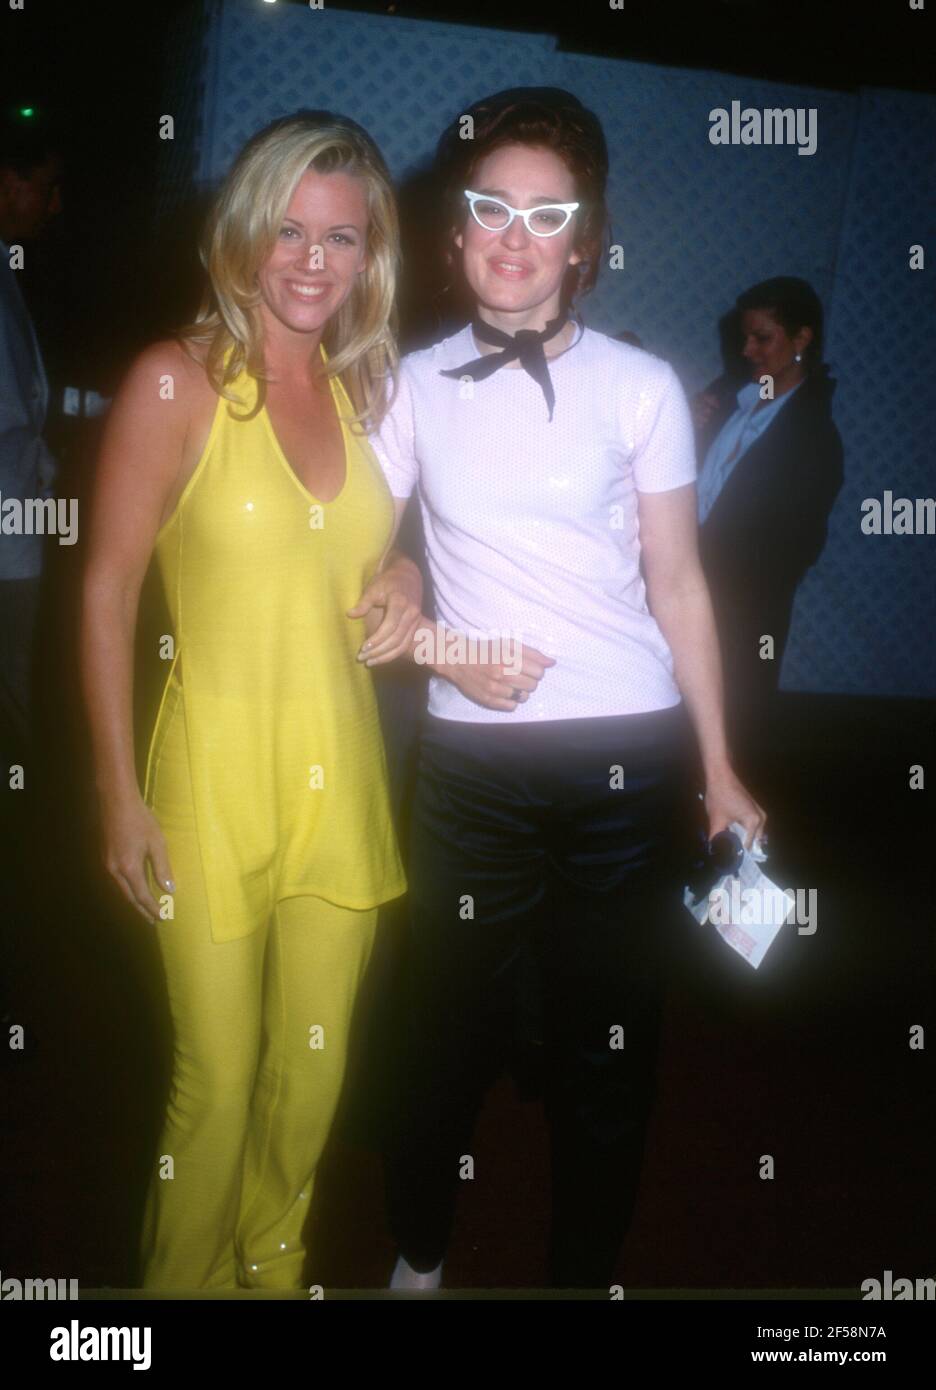 Westwood, California, USA 20th May 1996 Actress Jenny McCarthy and VJ Kennedy, aka Lisa Kennedy Montgomery attend Paramount Pictures' 'Mission Impossible' Premiere on May 20, 1996 at Mann Bruin Theatre in Westwood, California, USA. Photo by Barry King/Alamy Stock Photo Stock Photo